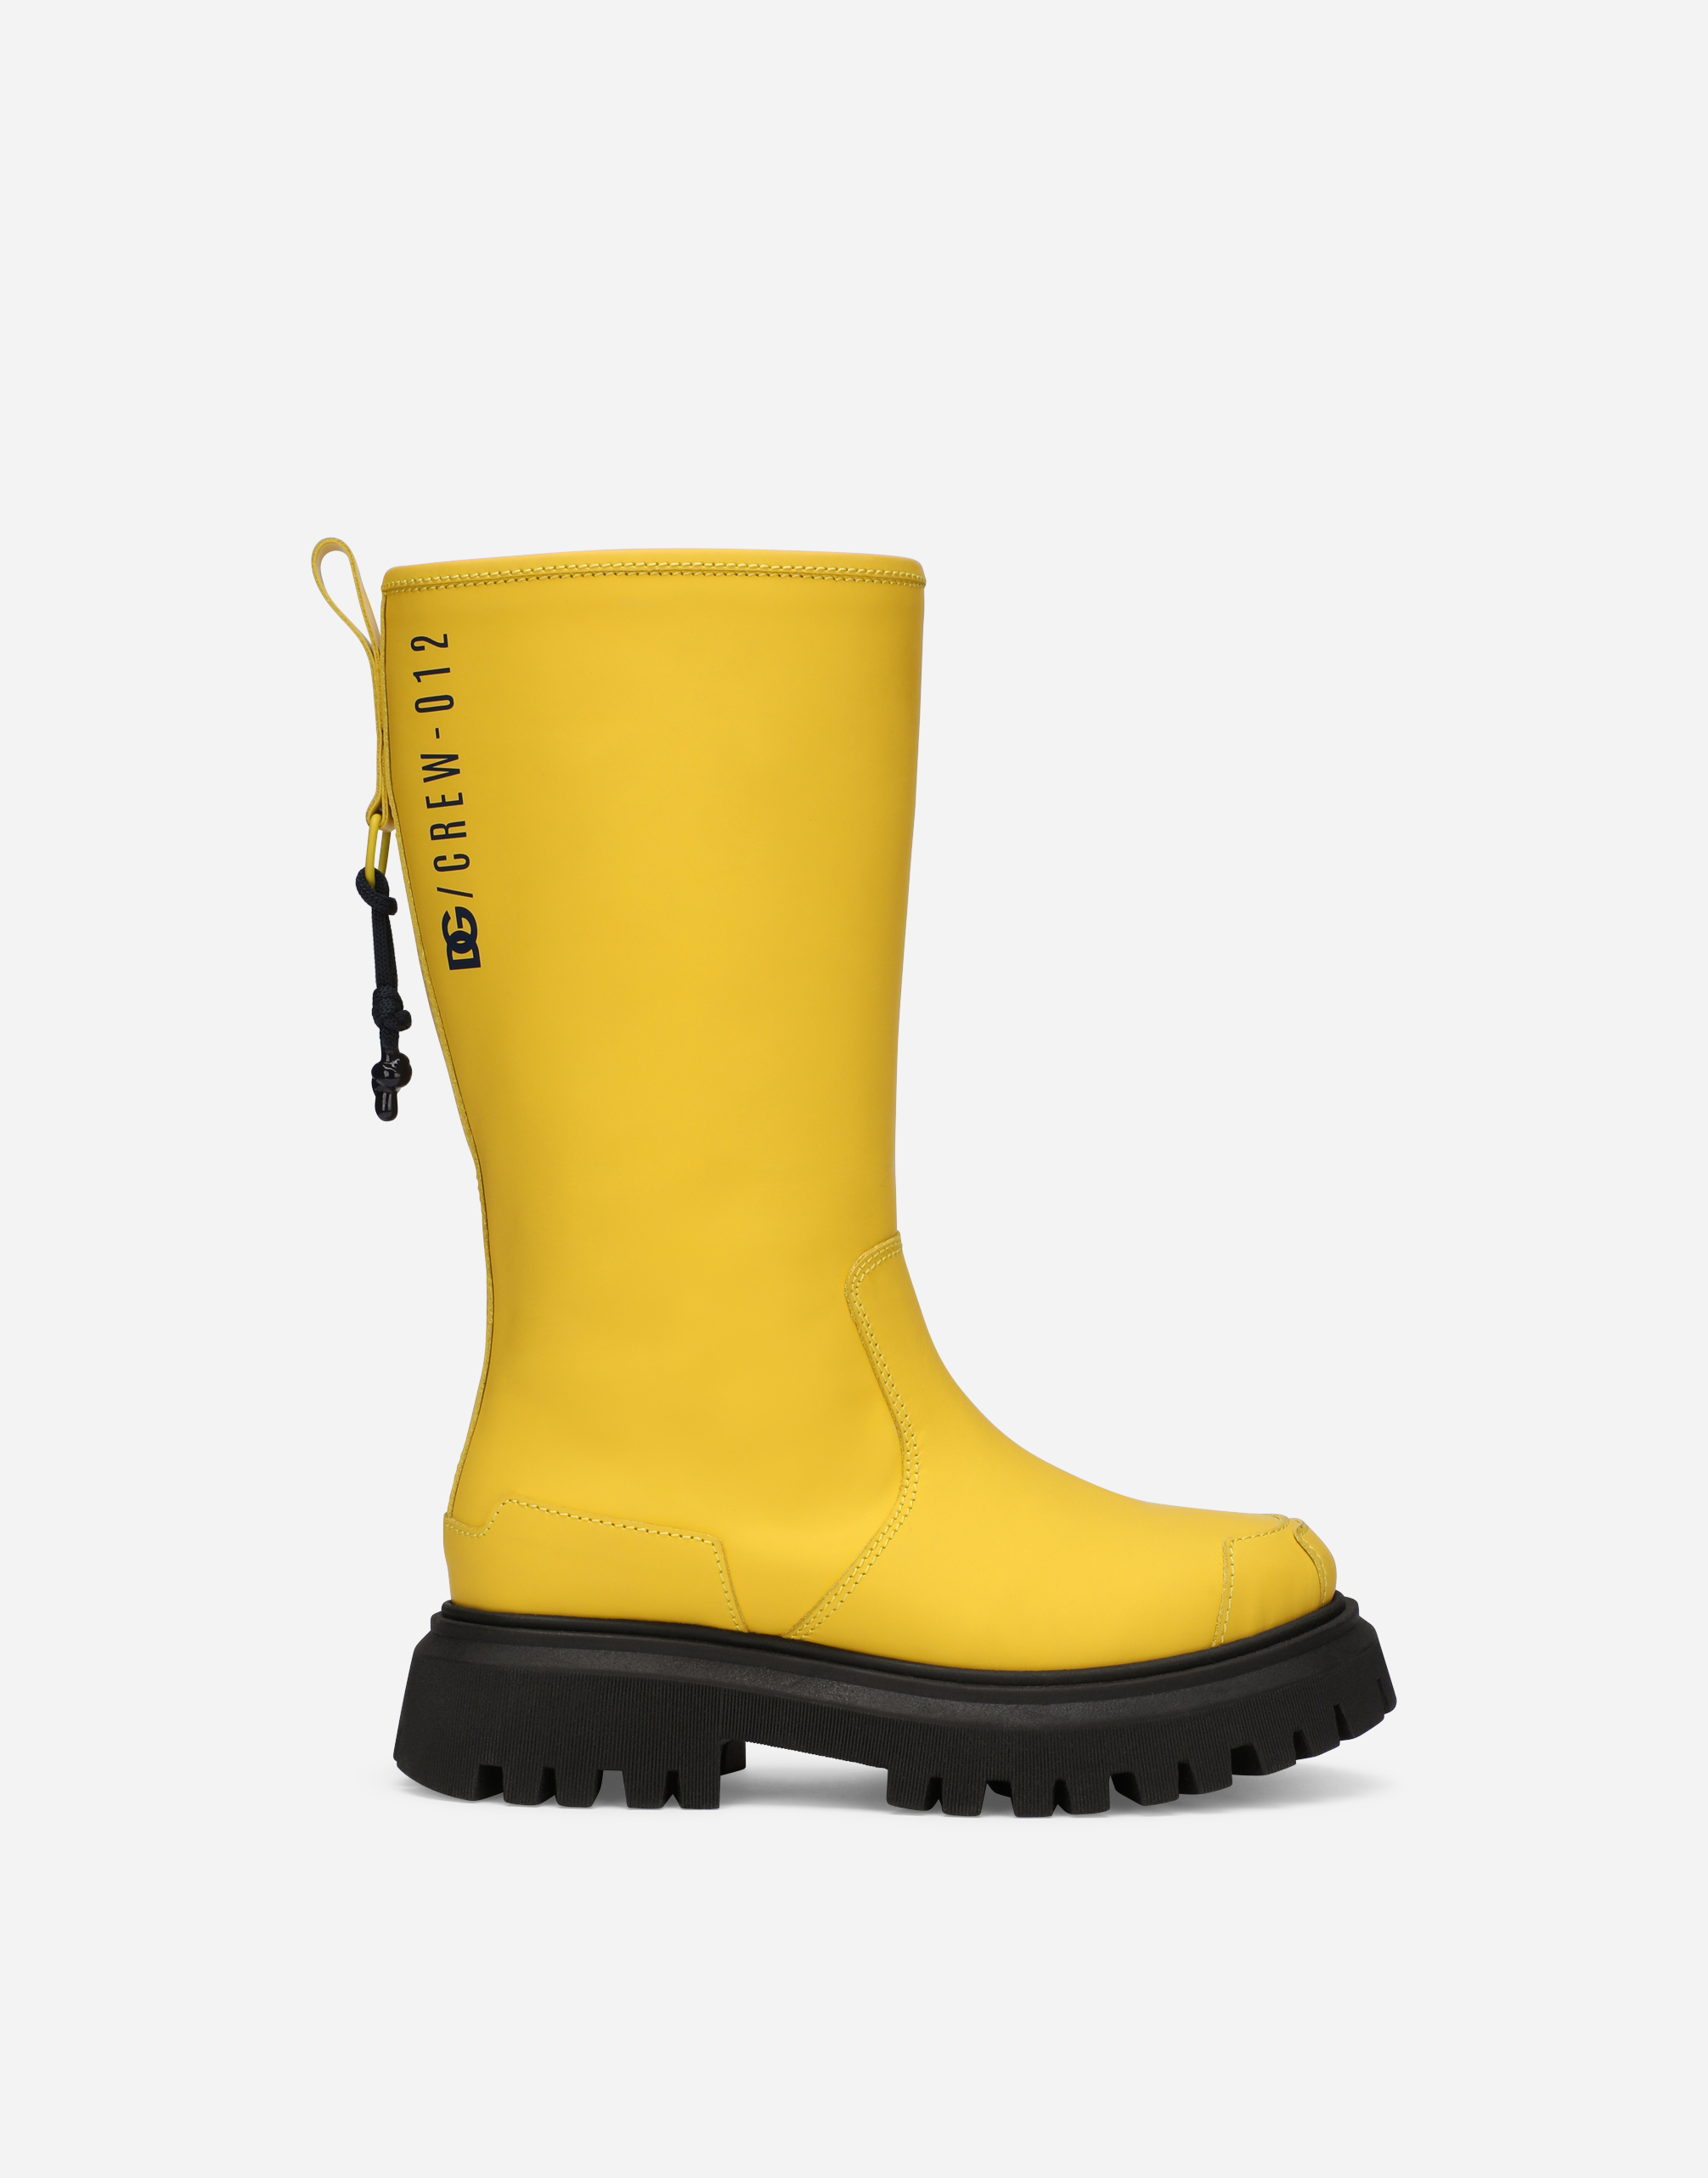 Rubberized calfskin boots in Yellow